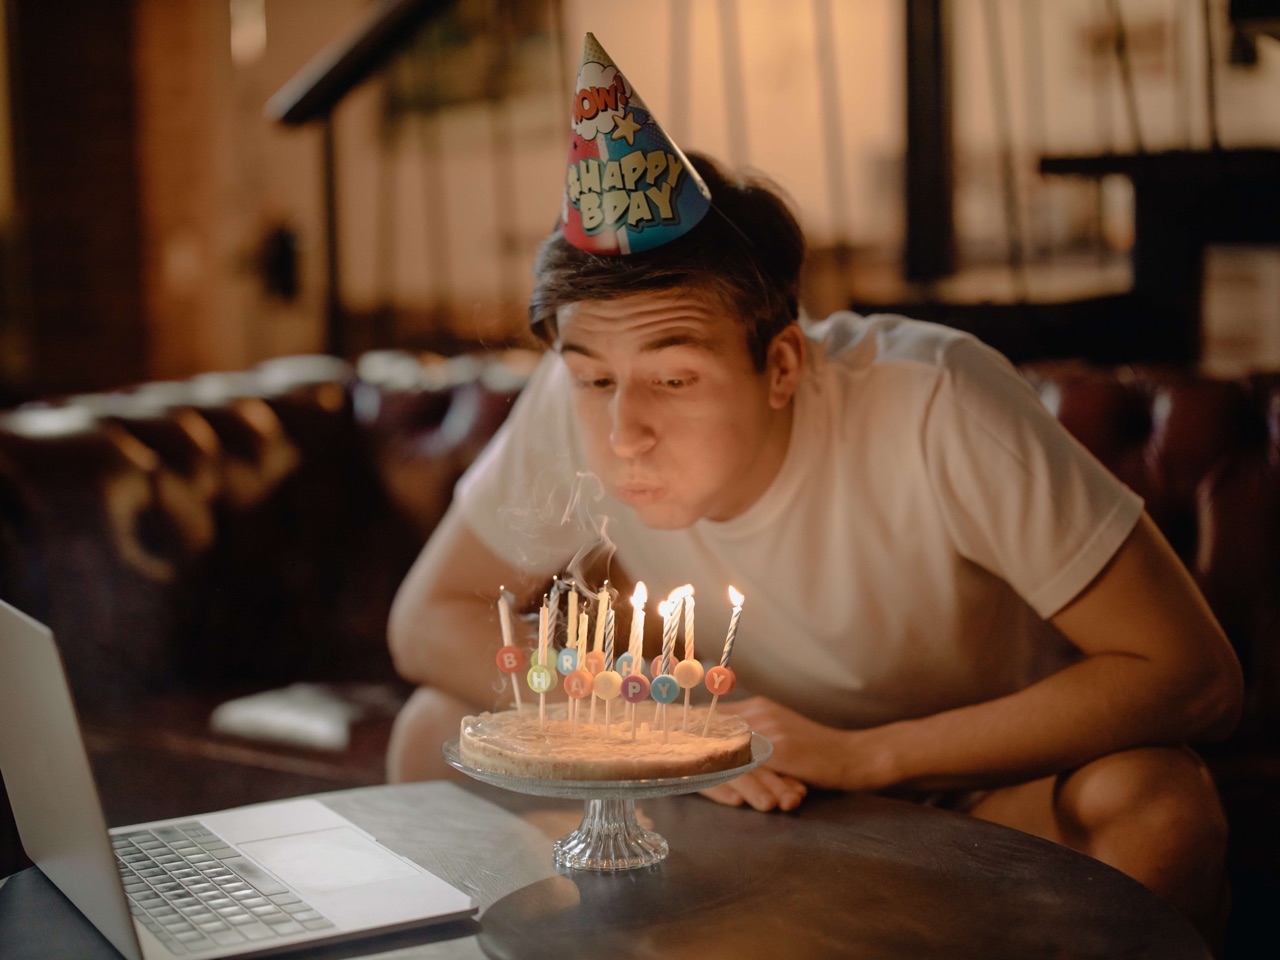 A man blowing out birthday candles